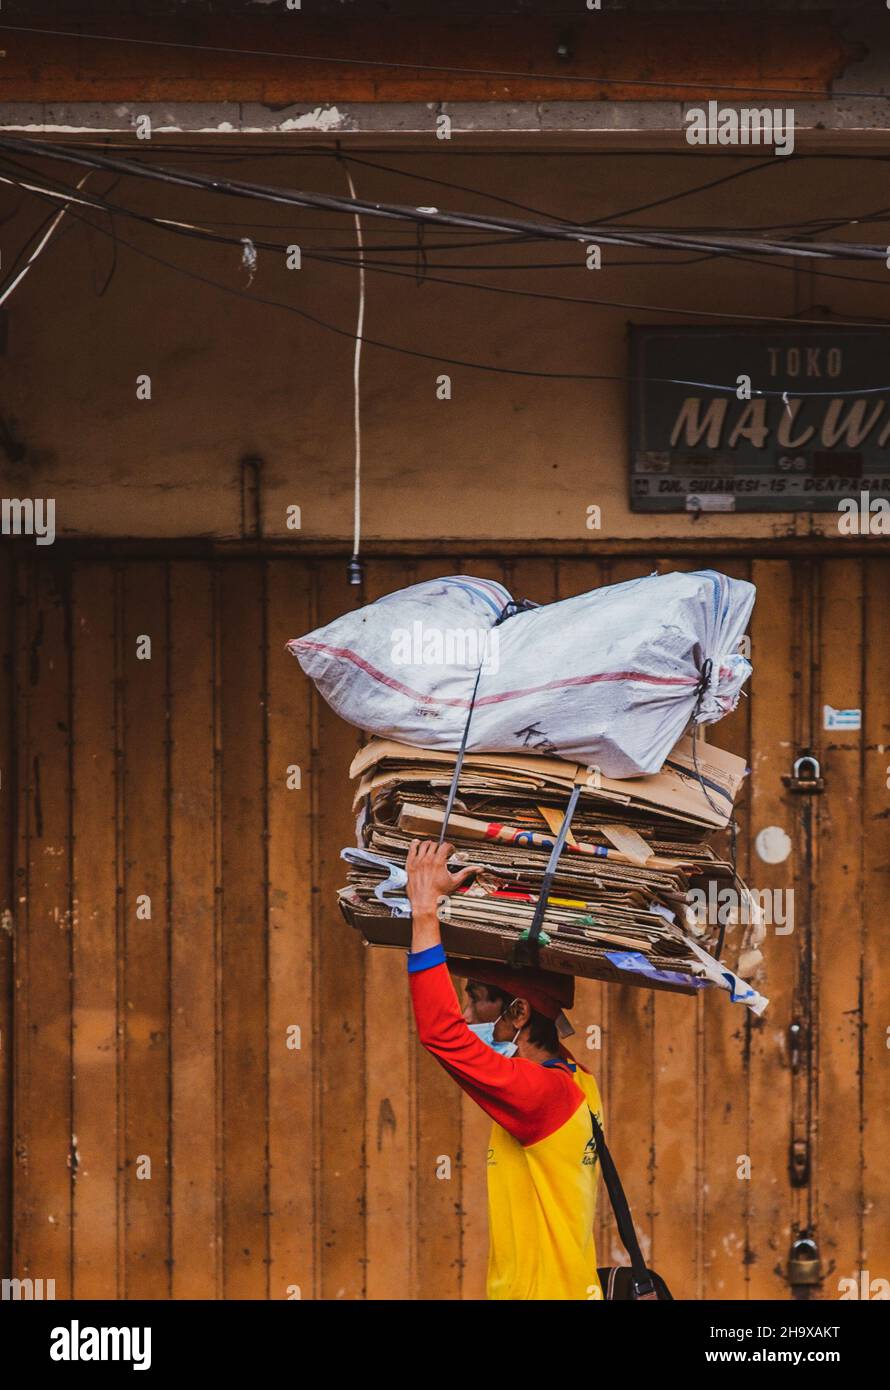 A man carrying goods on his head to be deliver Stock Photo